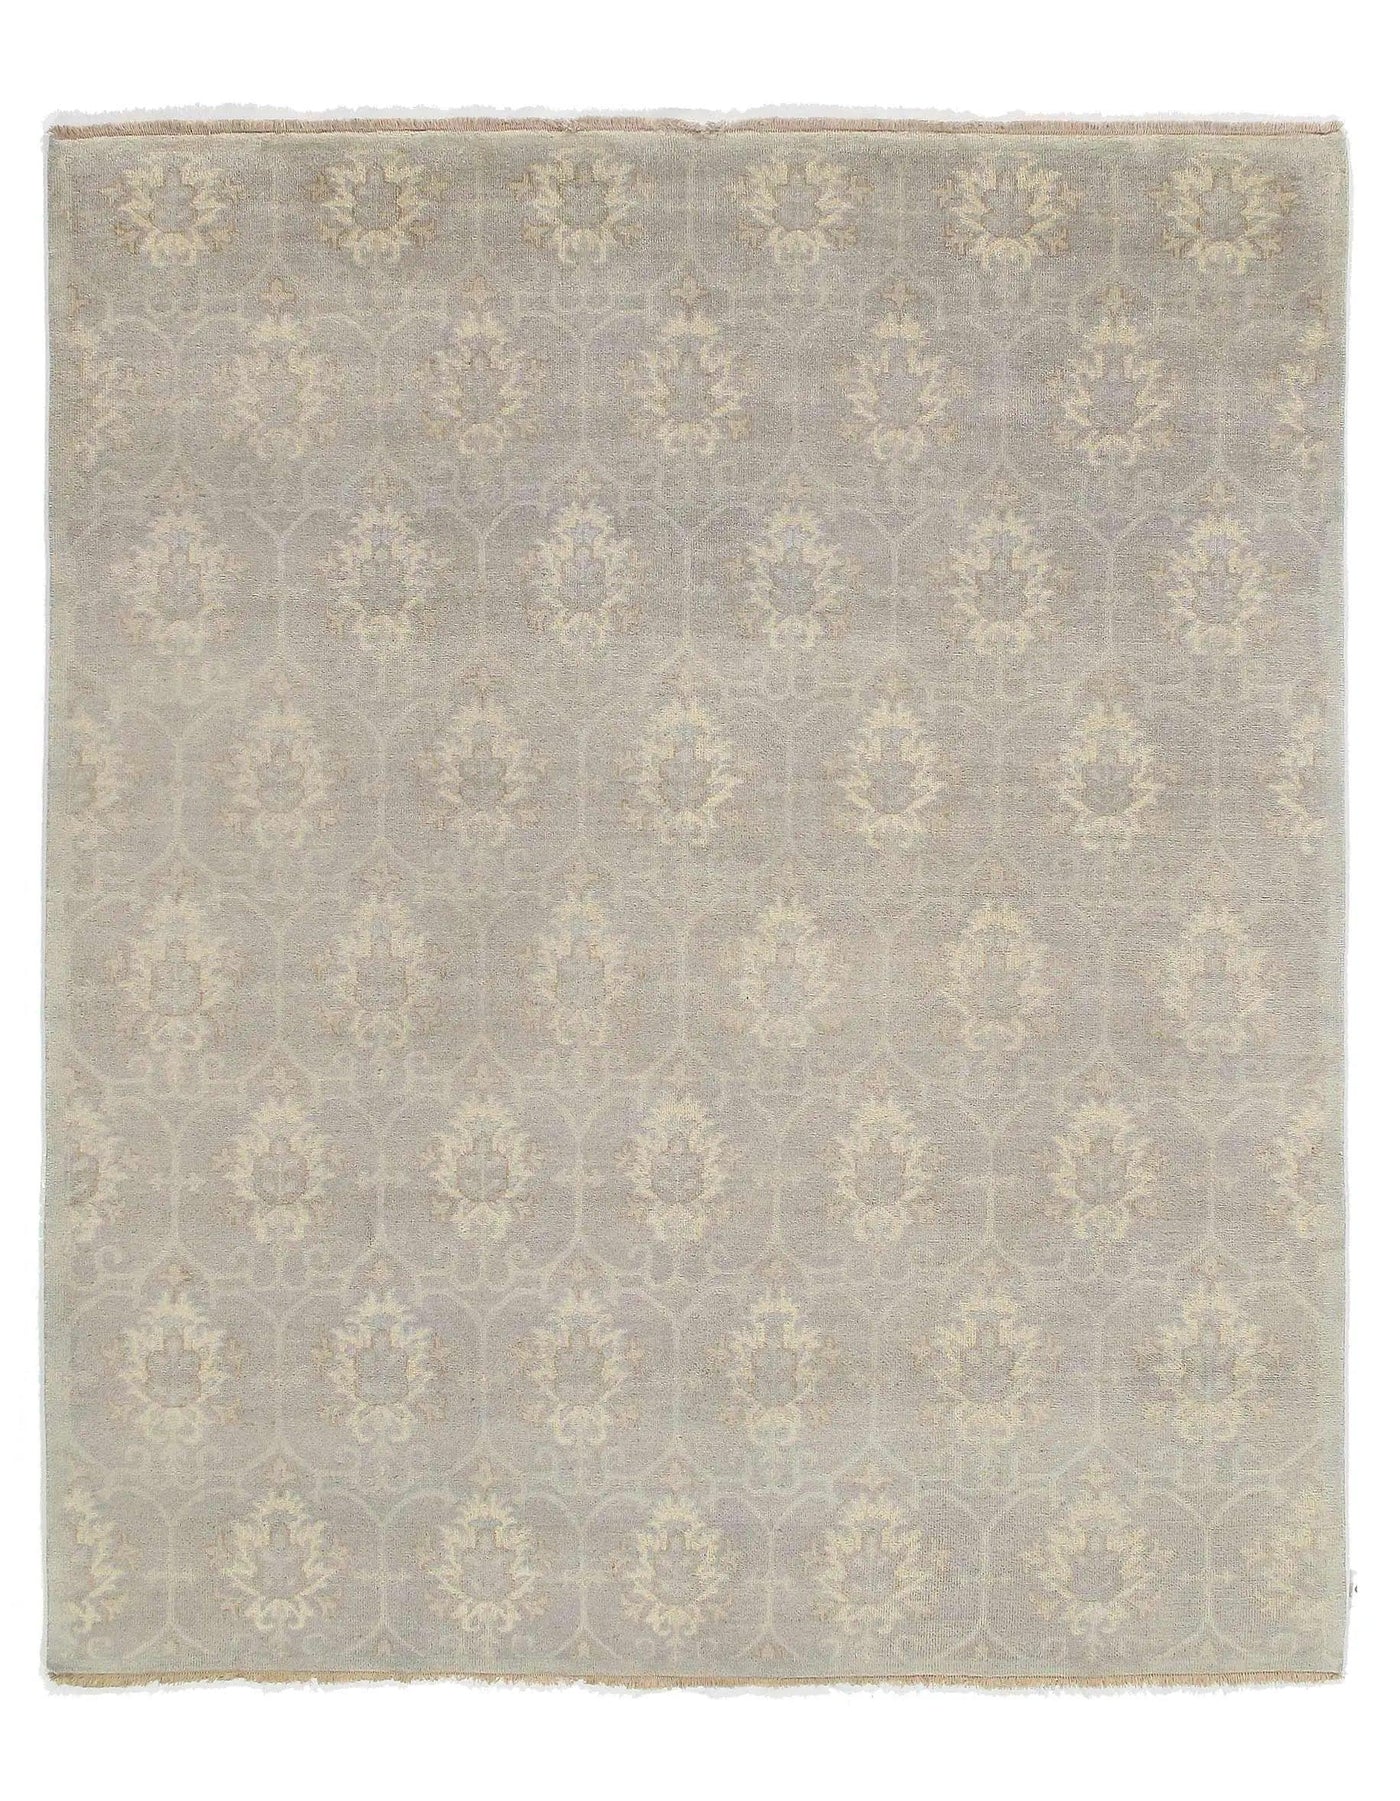 Gray Color Fine Hand Knotted Oushak Rug - 8' X 10'